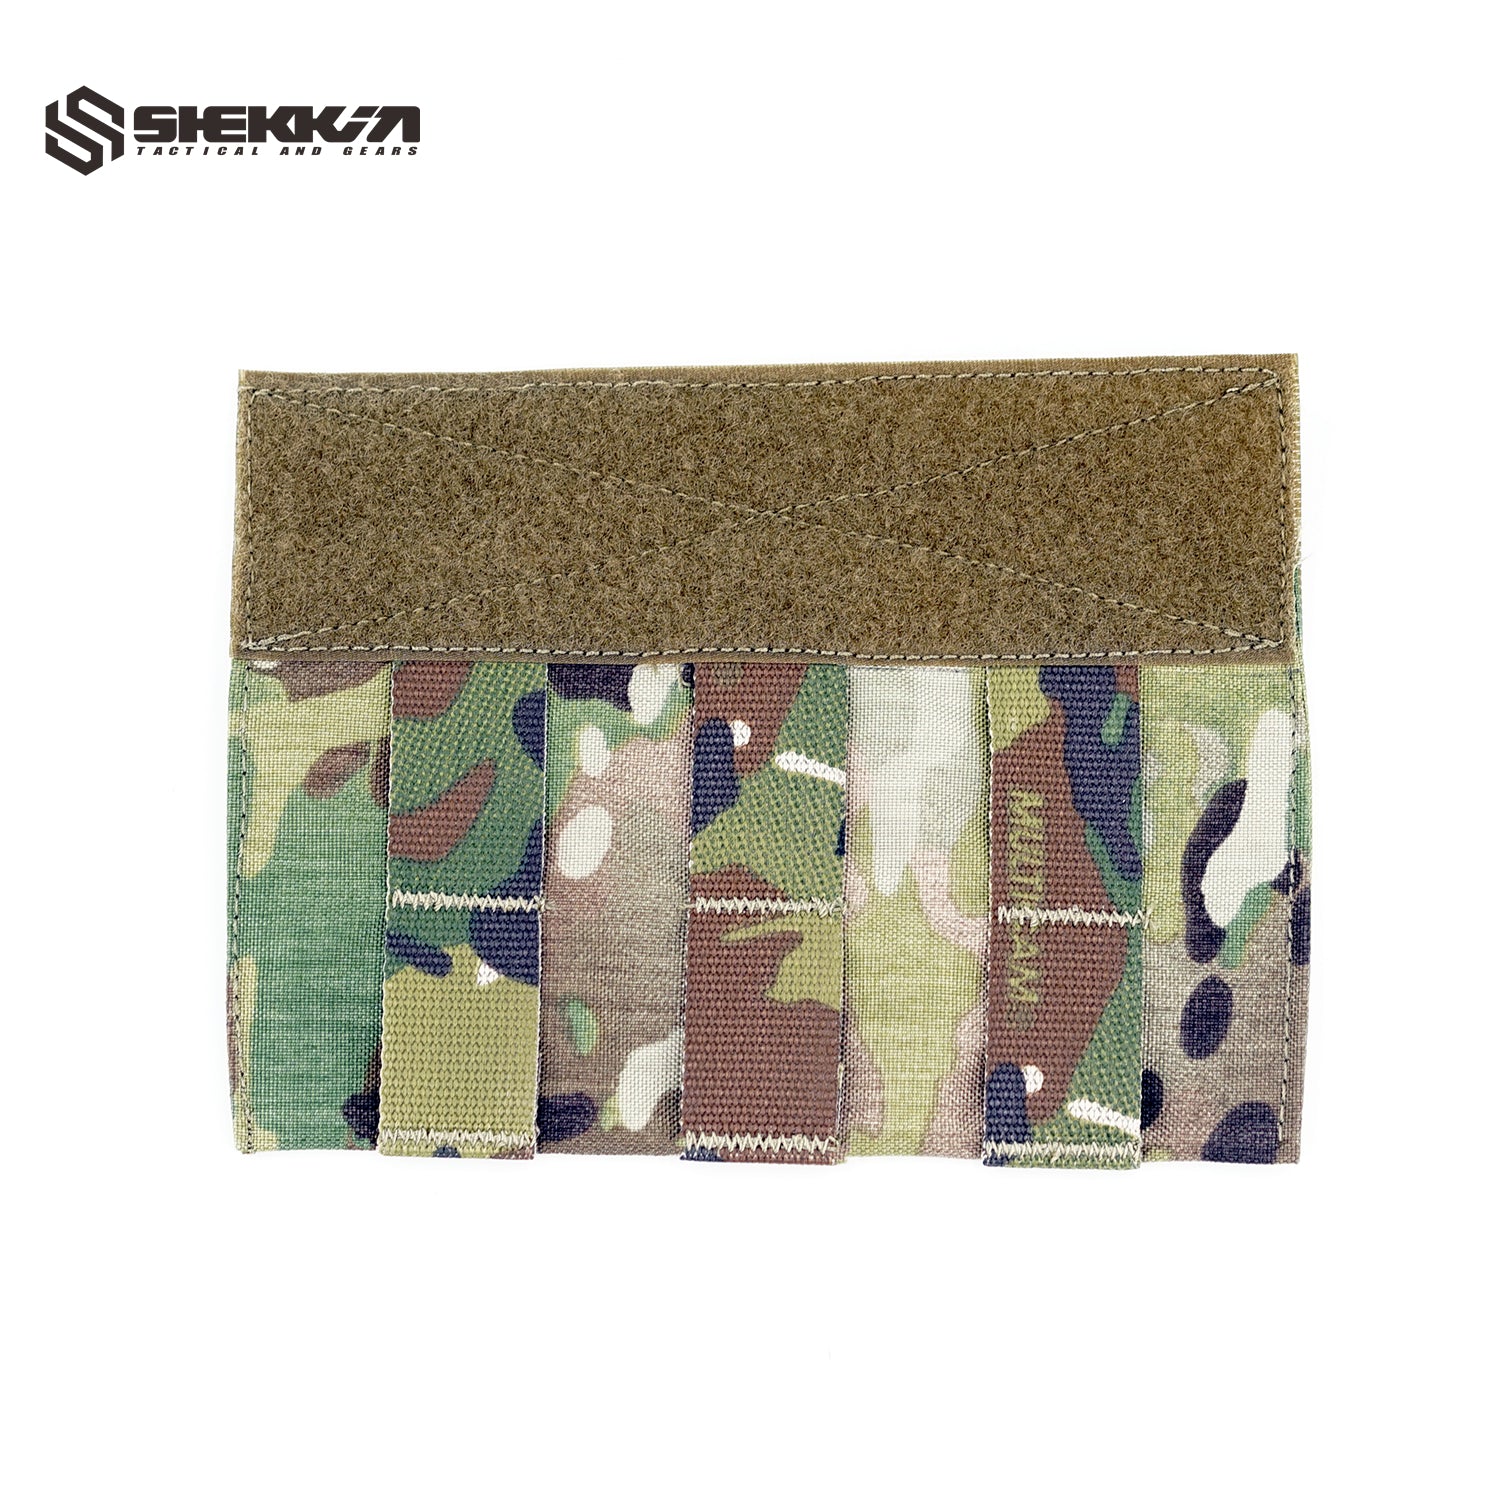 CAG Drop Front Expansion Molle Panel for Plate Carrier - Shekkin Gears